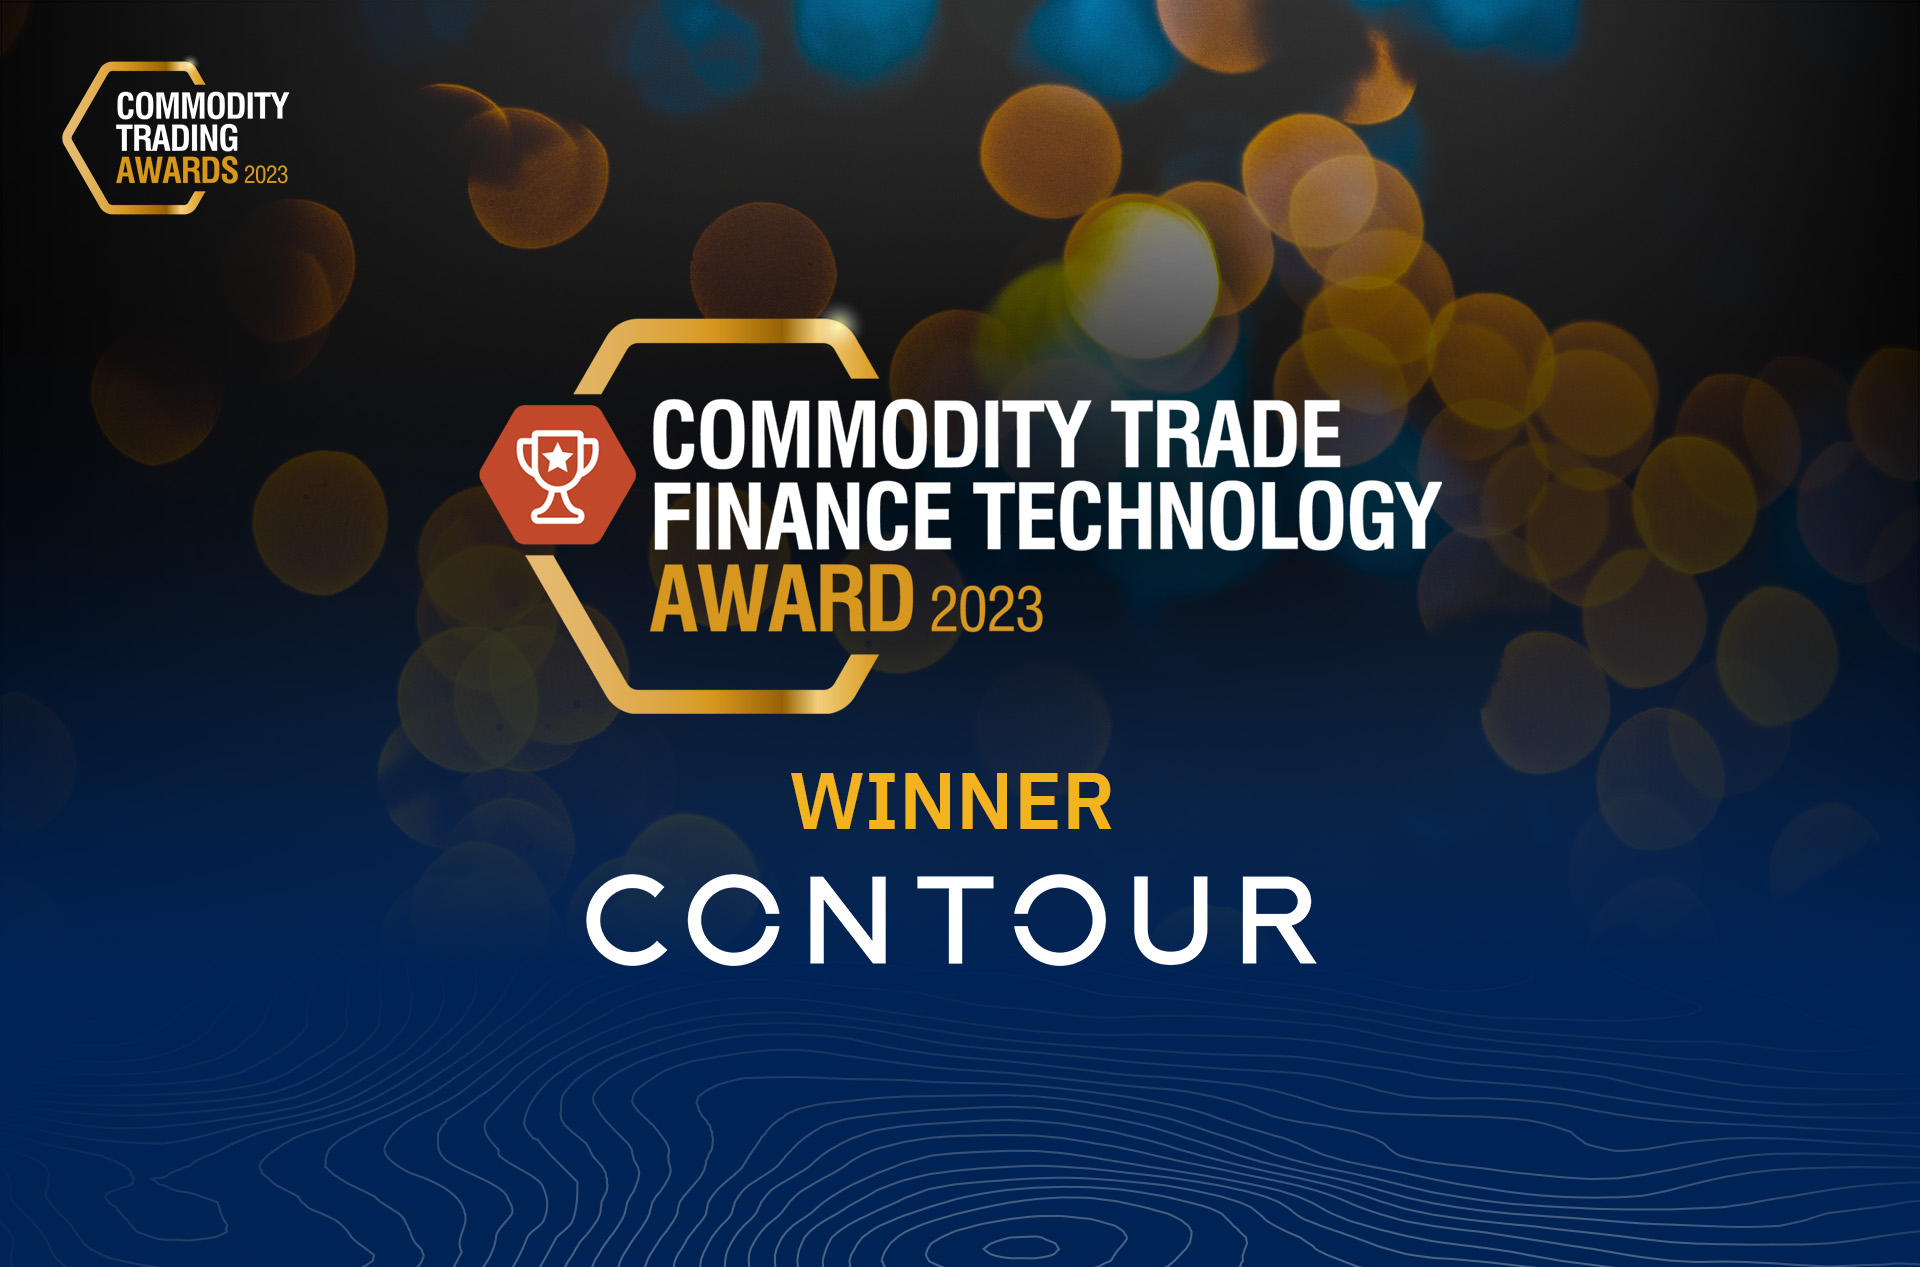 Contour wins Commodity Trade Finance Technology Award at Commodity Trading Awards 2023 